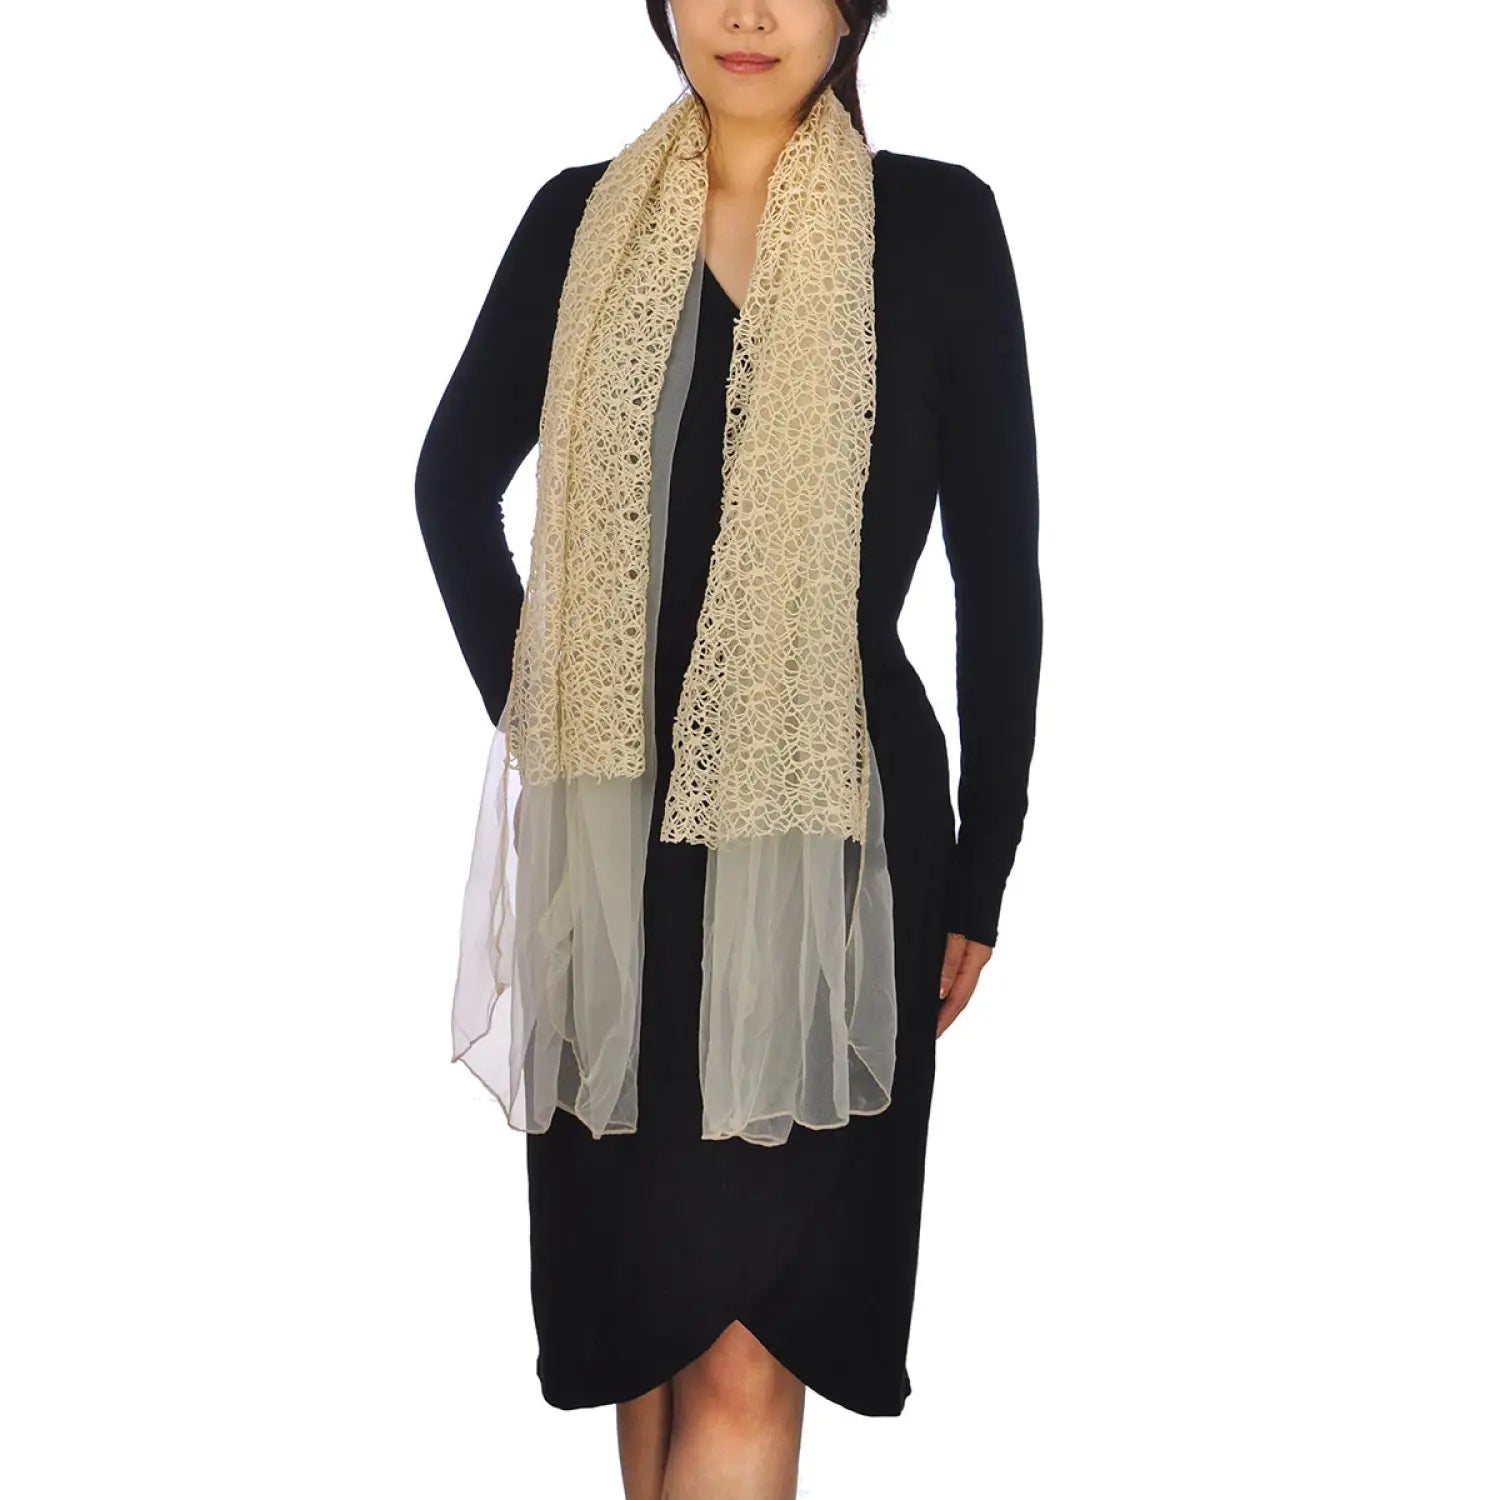 Woman in black dress wearing Chiffon Cowl Neck Scarf with Rope Detailing